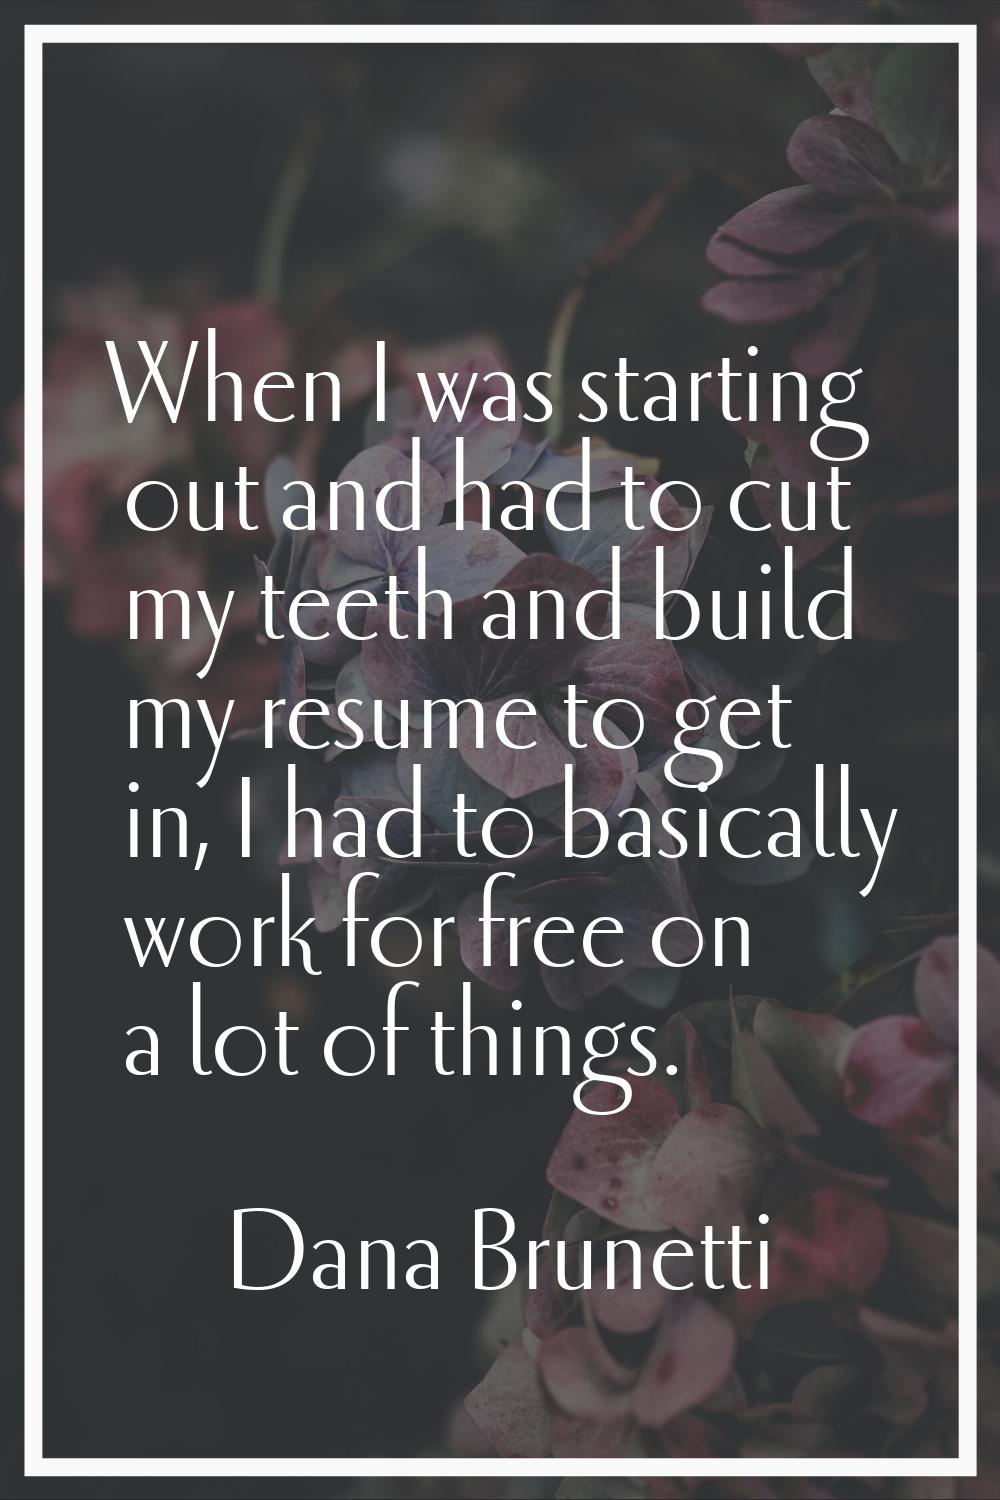 When I was starting out and had to cut my teeth and build my resume to get in, I had to basically w